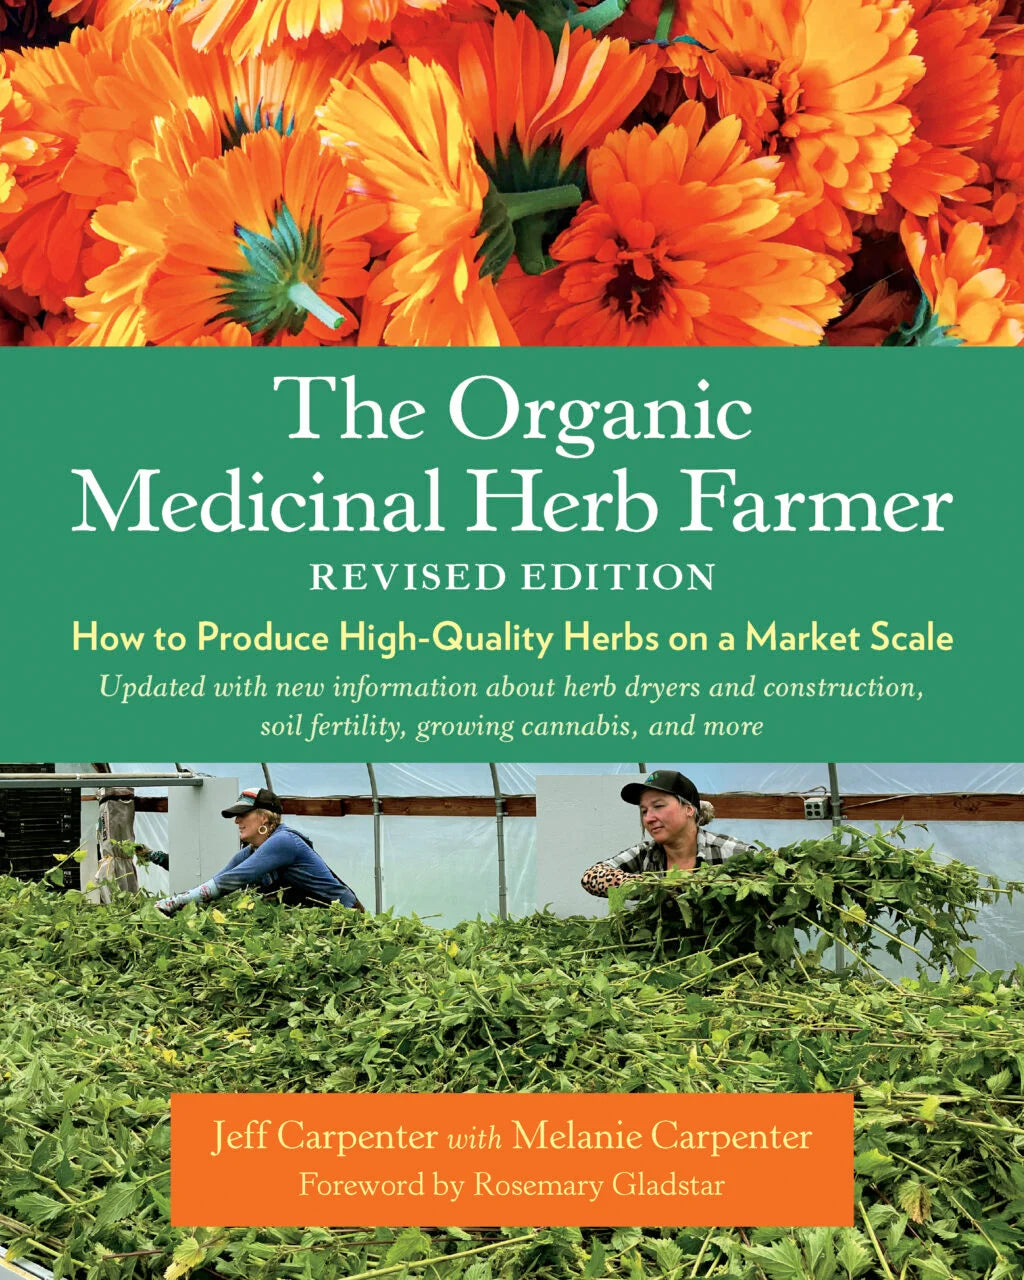 The Organic Medicinal Herb Farmer, Revised Edition by Jeff Carpenter - The Josephine Porter Institute